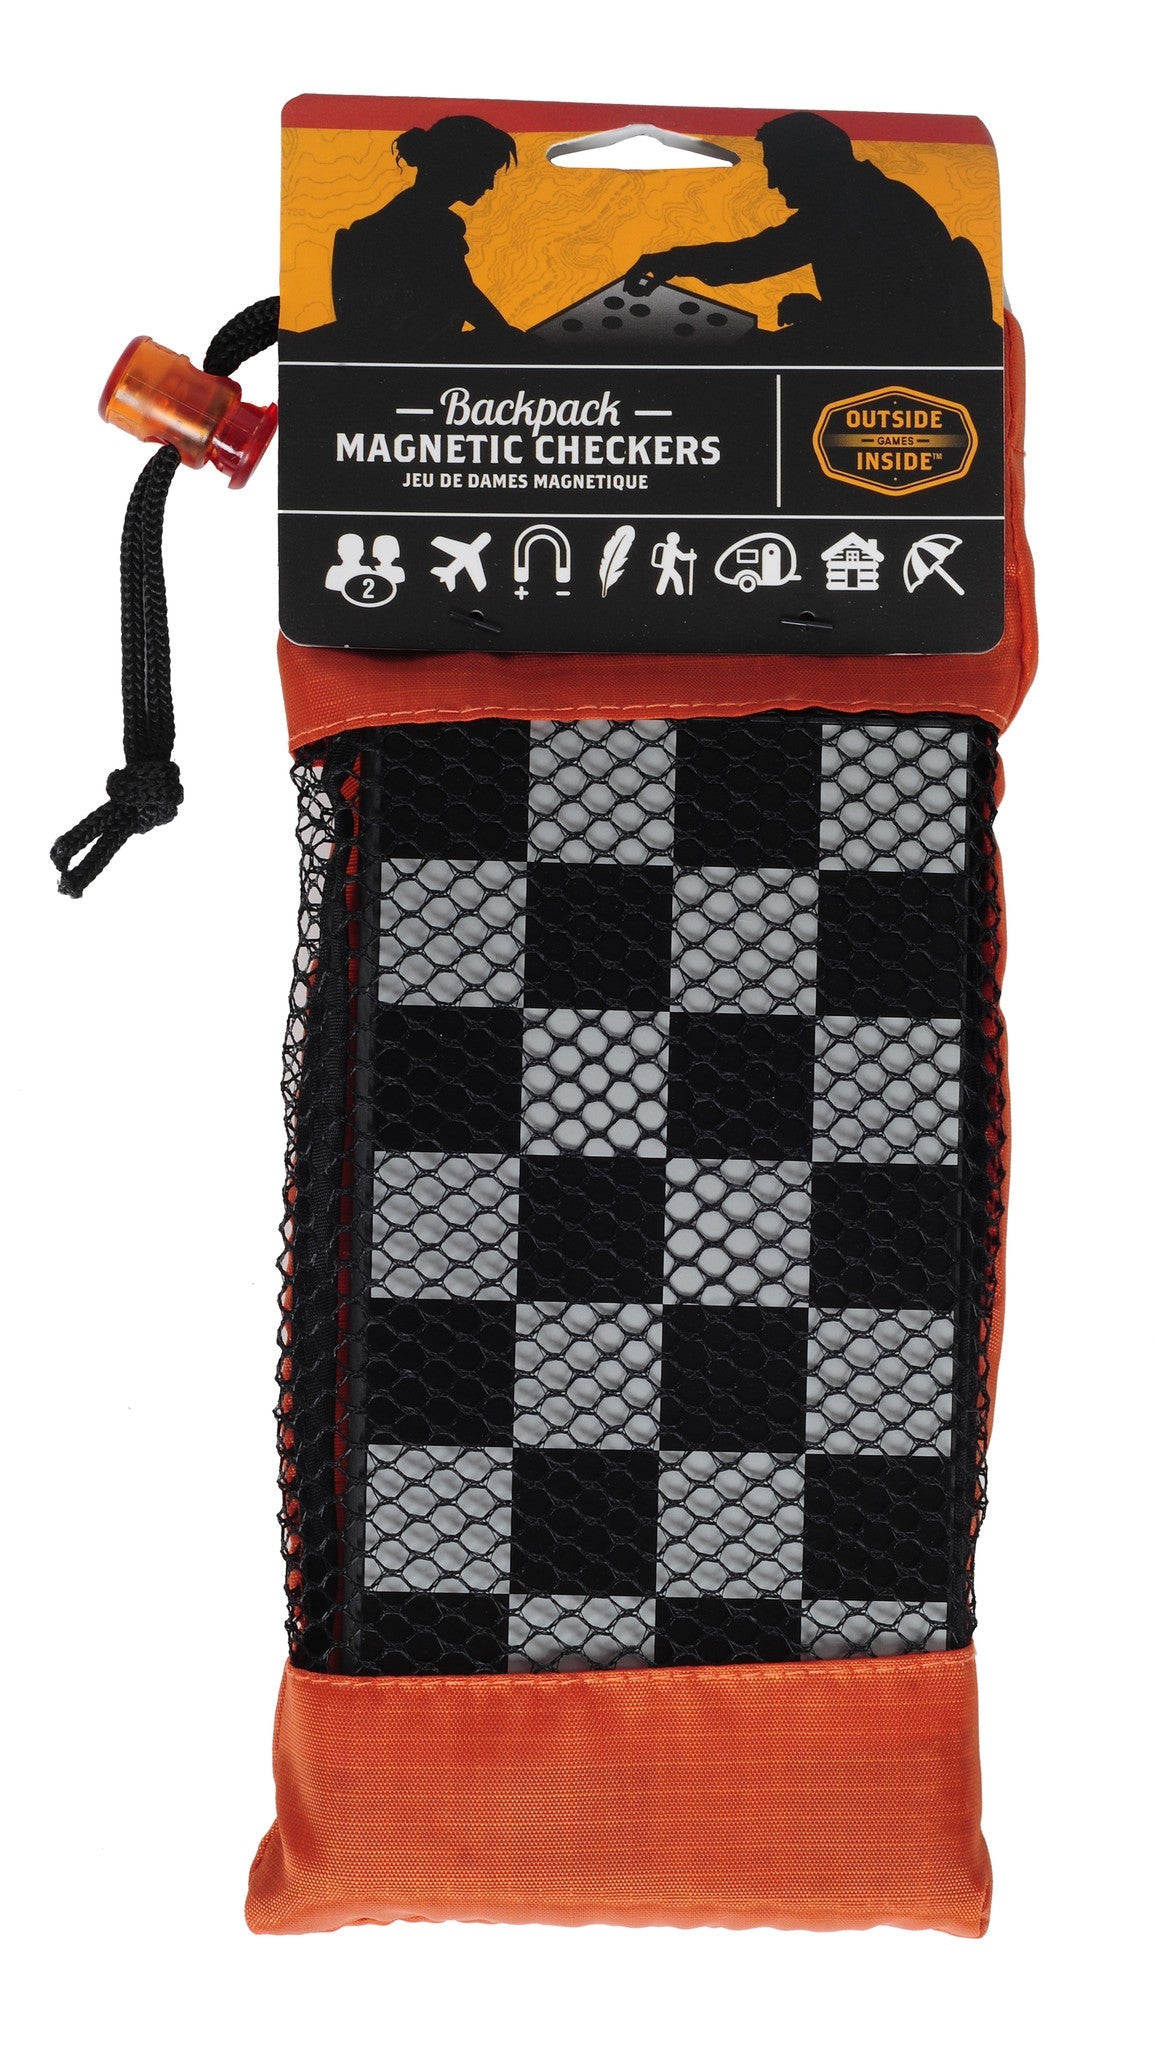 Folding checkers board - Outside Inside Gifts and Games